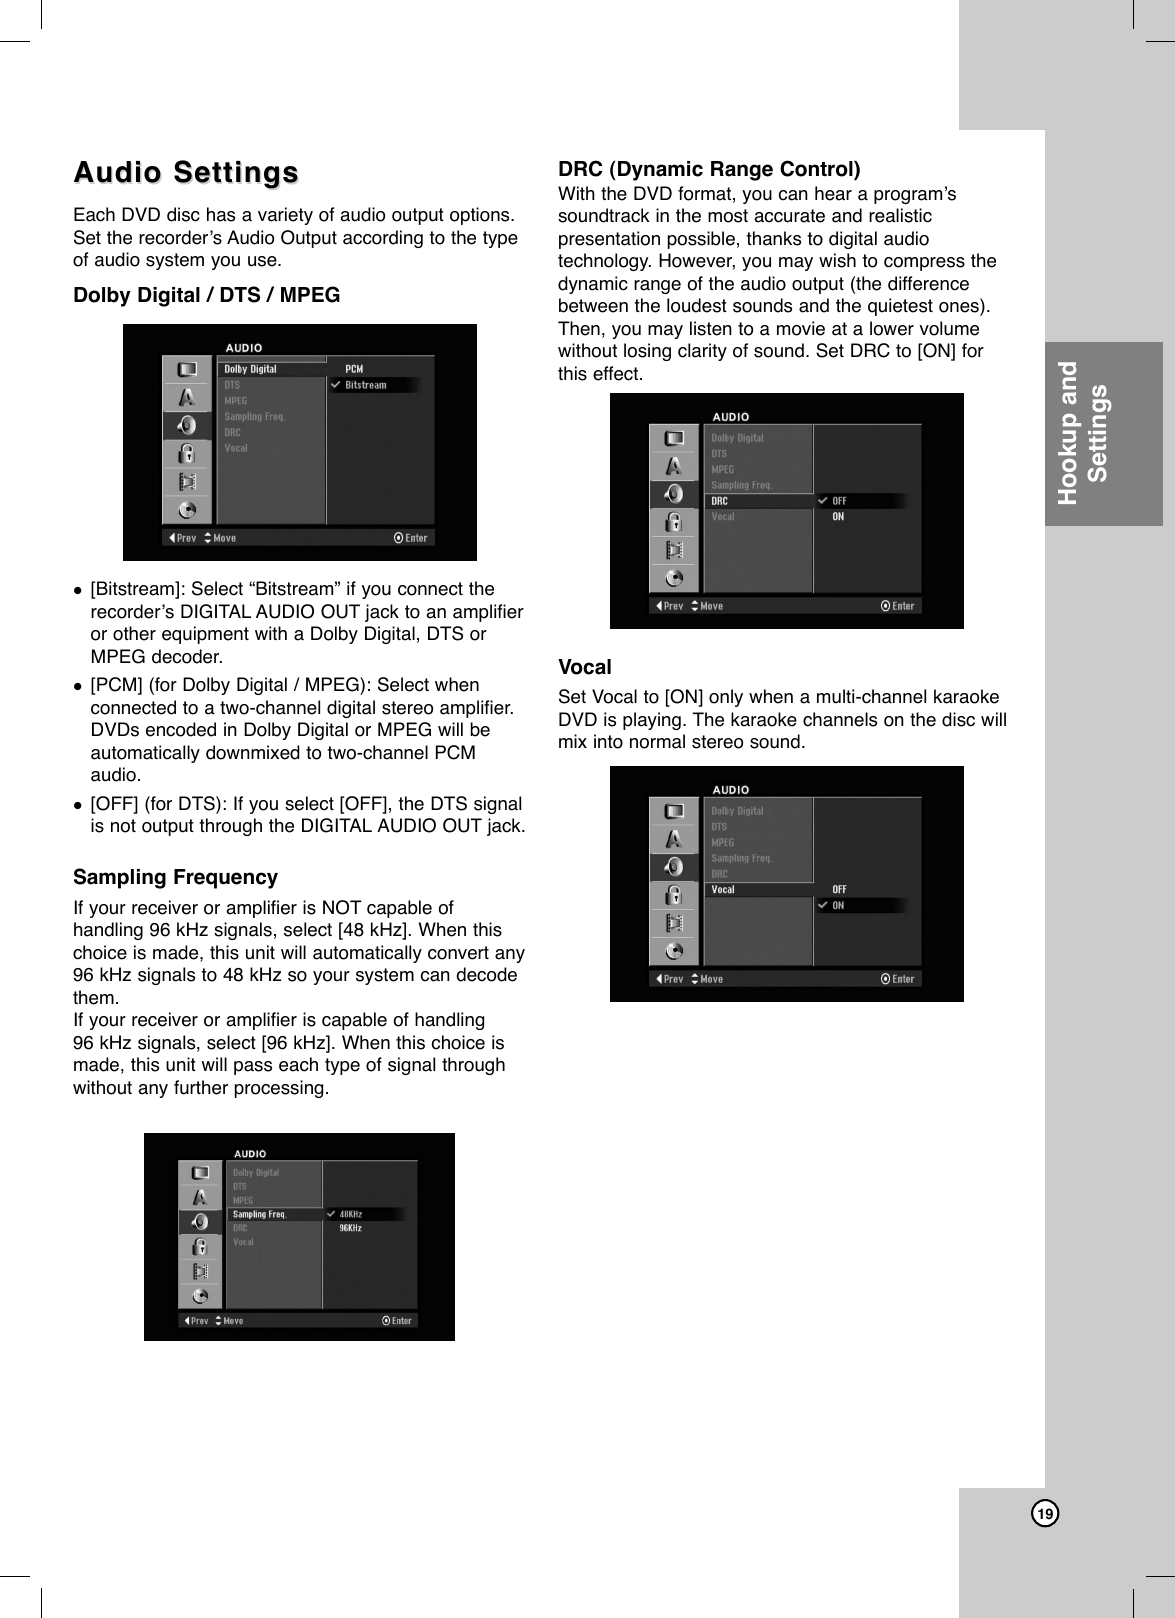 19Hookup andSettingsAudio SettingsAudio SettingsEach DVD disc has a variety of audio output options.Set the recorder’s Audio Output according to the typeof audio system you use. Dolby Digital / DTS / MPEG[Bitstream]: Select “Bitstream” if you connect therecorder’s DIGITAL AUDIO OUT jack to an amplifieror other equipment with a Dolby Digital, DTS orMPEG decoder.[PCM] (for Dolby Digital / MPEG): Select whenconnected to a two-channel digital stereo amplifier.DVDs encoded in Dolby Digital or MPEG will beautomatically downmixed to two-channel PCMaudio.[OFF] (for DTS): If you select [OFF], the DTS signalis not output through the DIGITAL AUDIO OUT jack.Sampling FrequencyIf your receiver or amplifier is NOT capable ofhandling 96 kHz signals, select [48 kHz]. When thischoice is made, this unit will automatically convert any96 kHz signals to 48 kHz so your system can decodethem. If your receiver or amplifier is capable of handling 96 kHz signals, select [96 kHz]. When this choice ismade, this unit will pass each type of signal throughwithout any further processing. DRC (Dynamic Range Control) With the DVD format, you can hear a program’ssoundtrack in the most accurate and realisticpresentation possible, thanks to digital audiotechnology. However, you may wish to compress thedynamic range of the audio output (the differencebetween the loudest sounds and the quietest ones).Then, you may listen to a movie at a lower volumewithout losing clarity of sound. Set DRC to [ON] forthis effect.VocalSet Vocal to [ON] only when a multi-channel karaokeDVD is playing. The karaoke channels on the disc willmix into normal stereo sound.